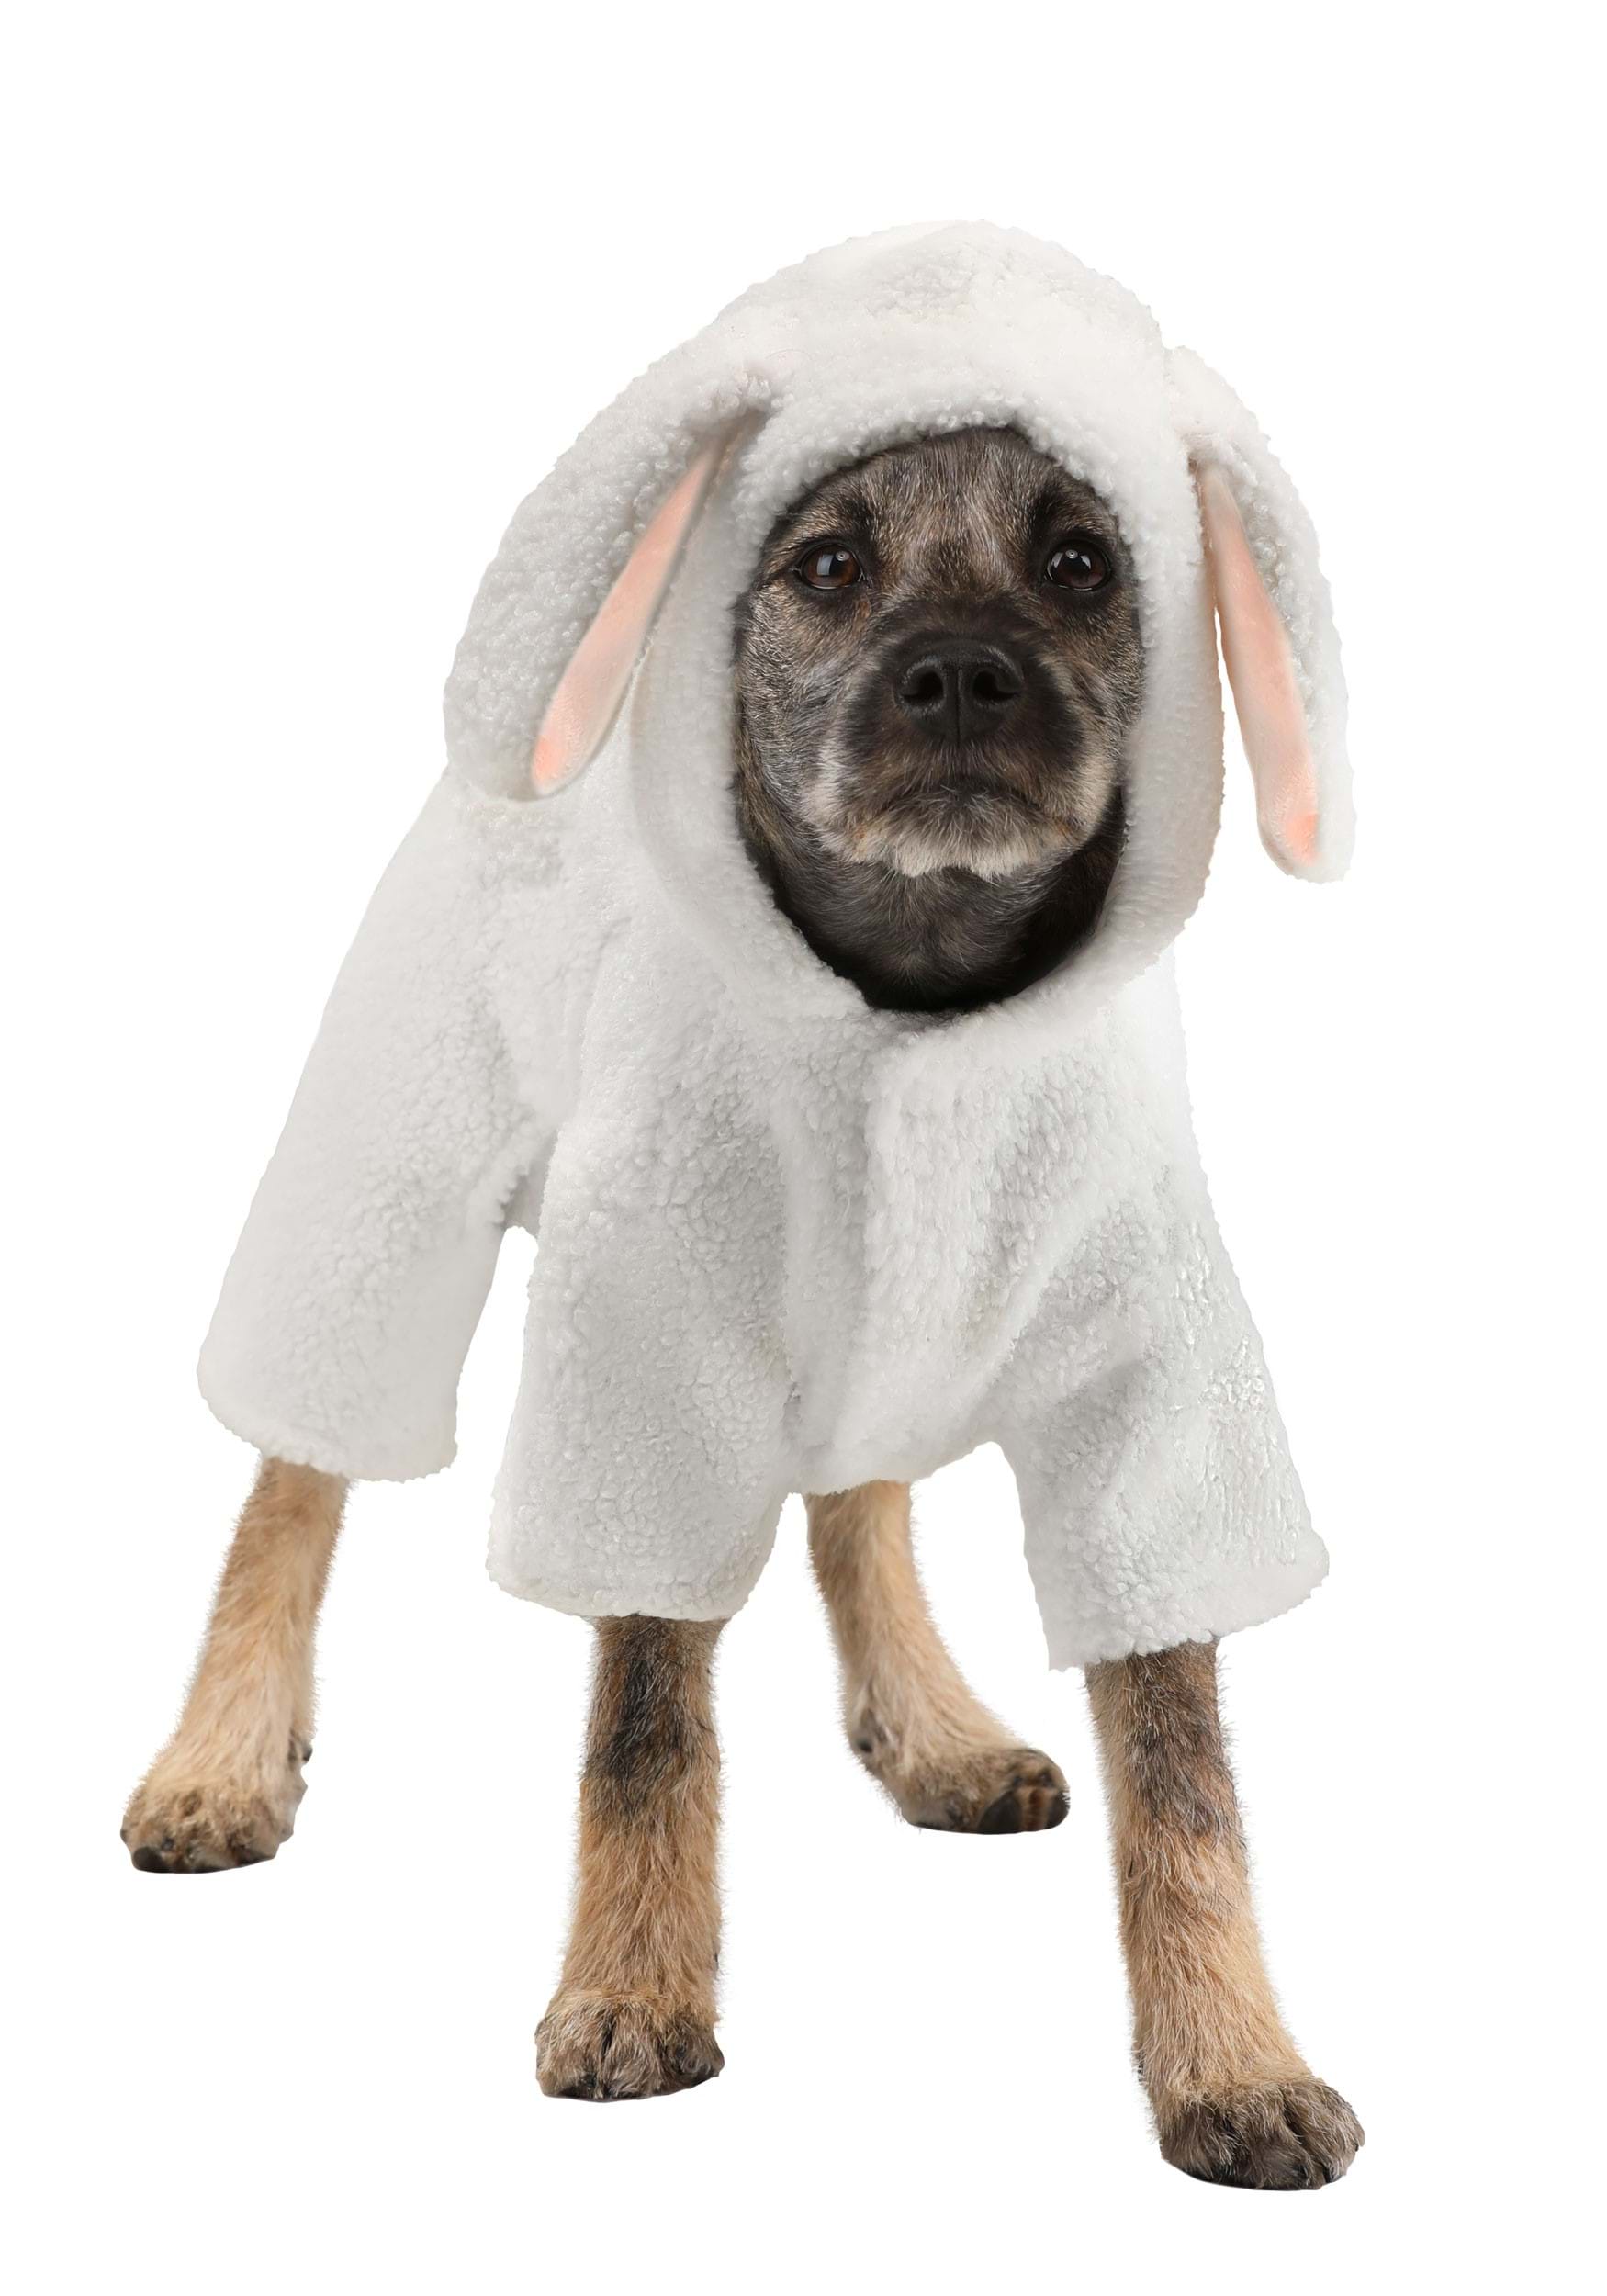 Sheep Pet Fancy Dress Costume For Dogs And Cats